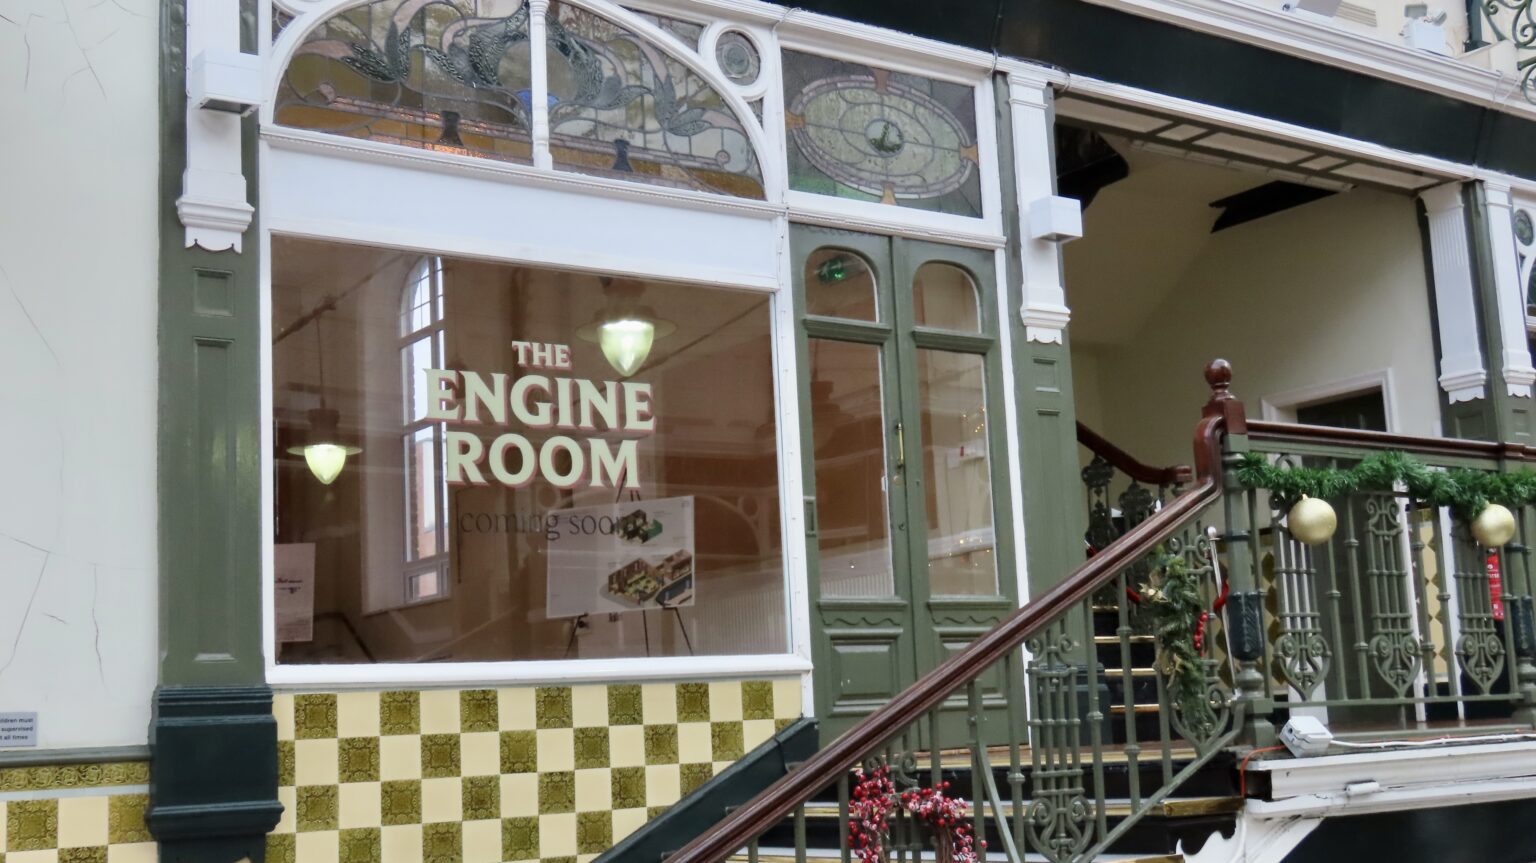 The Engine Room is open at Wayfarers Shopping Arcade in Southport, left by Dr Eric Lybeck. Photo by Andrew Brown Stand Up For Southport